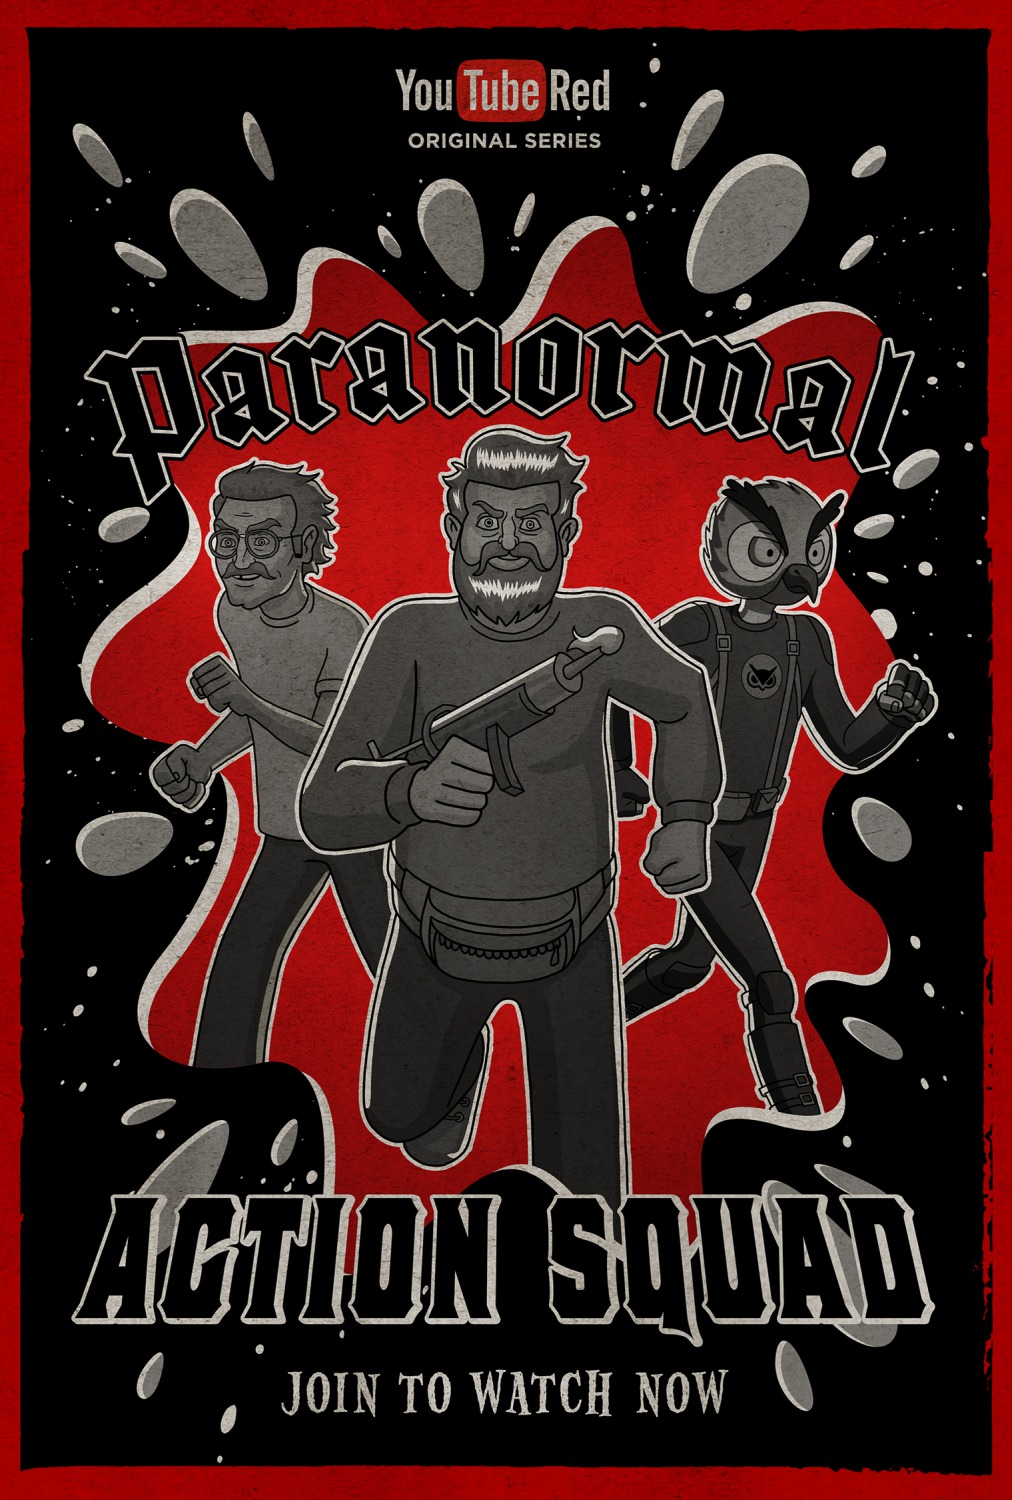 Extra Large Movie Poster Image for Paranormal Action Squad (#11 of 11)